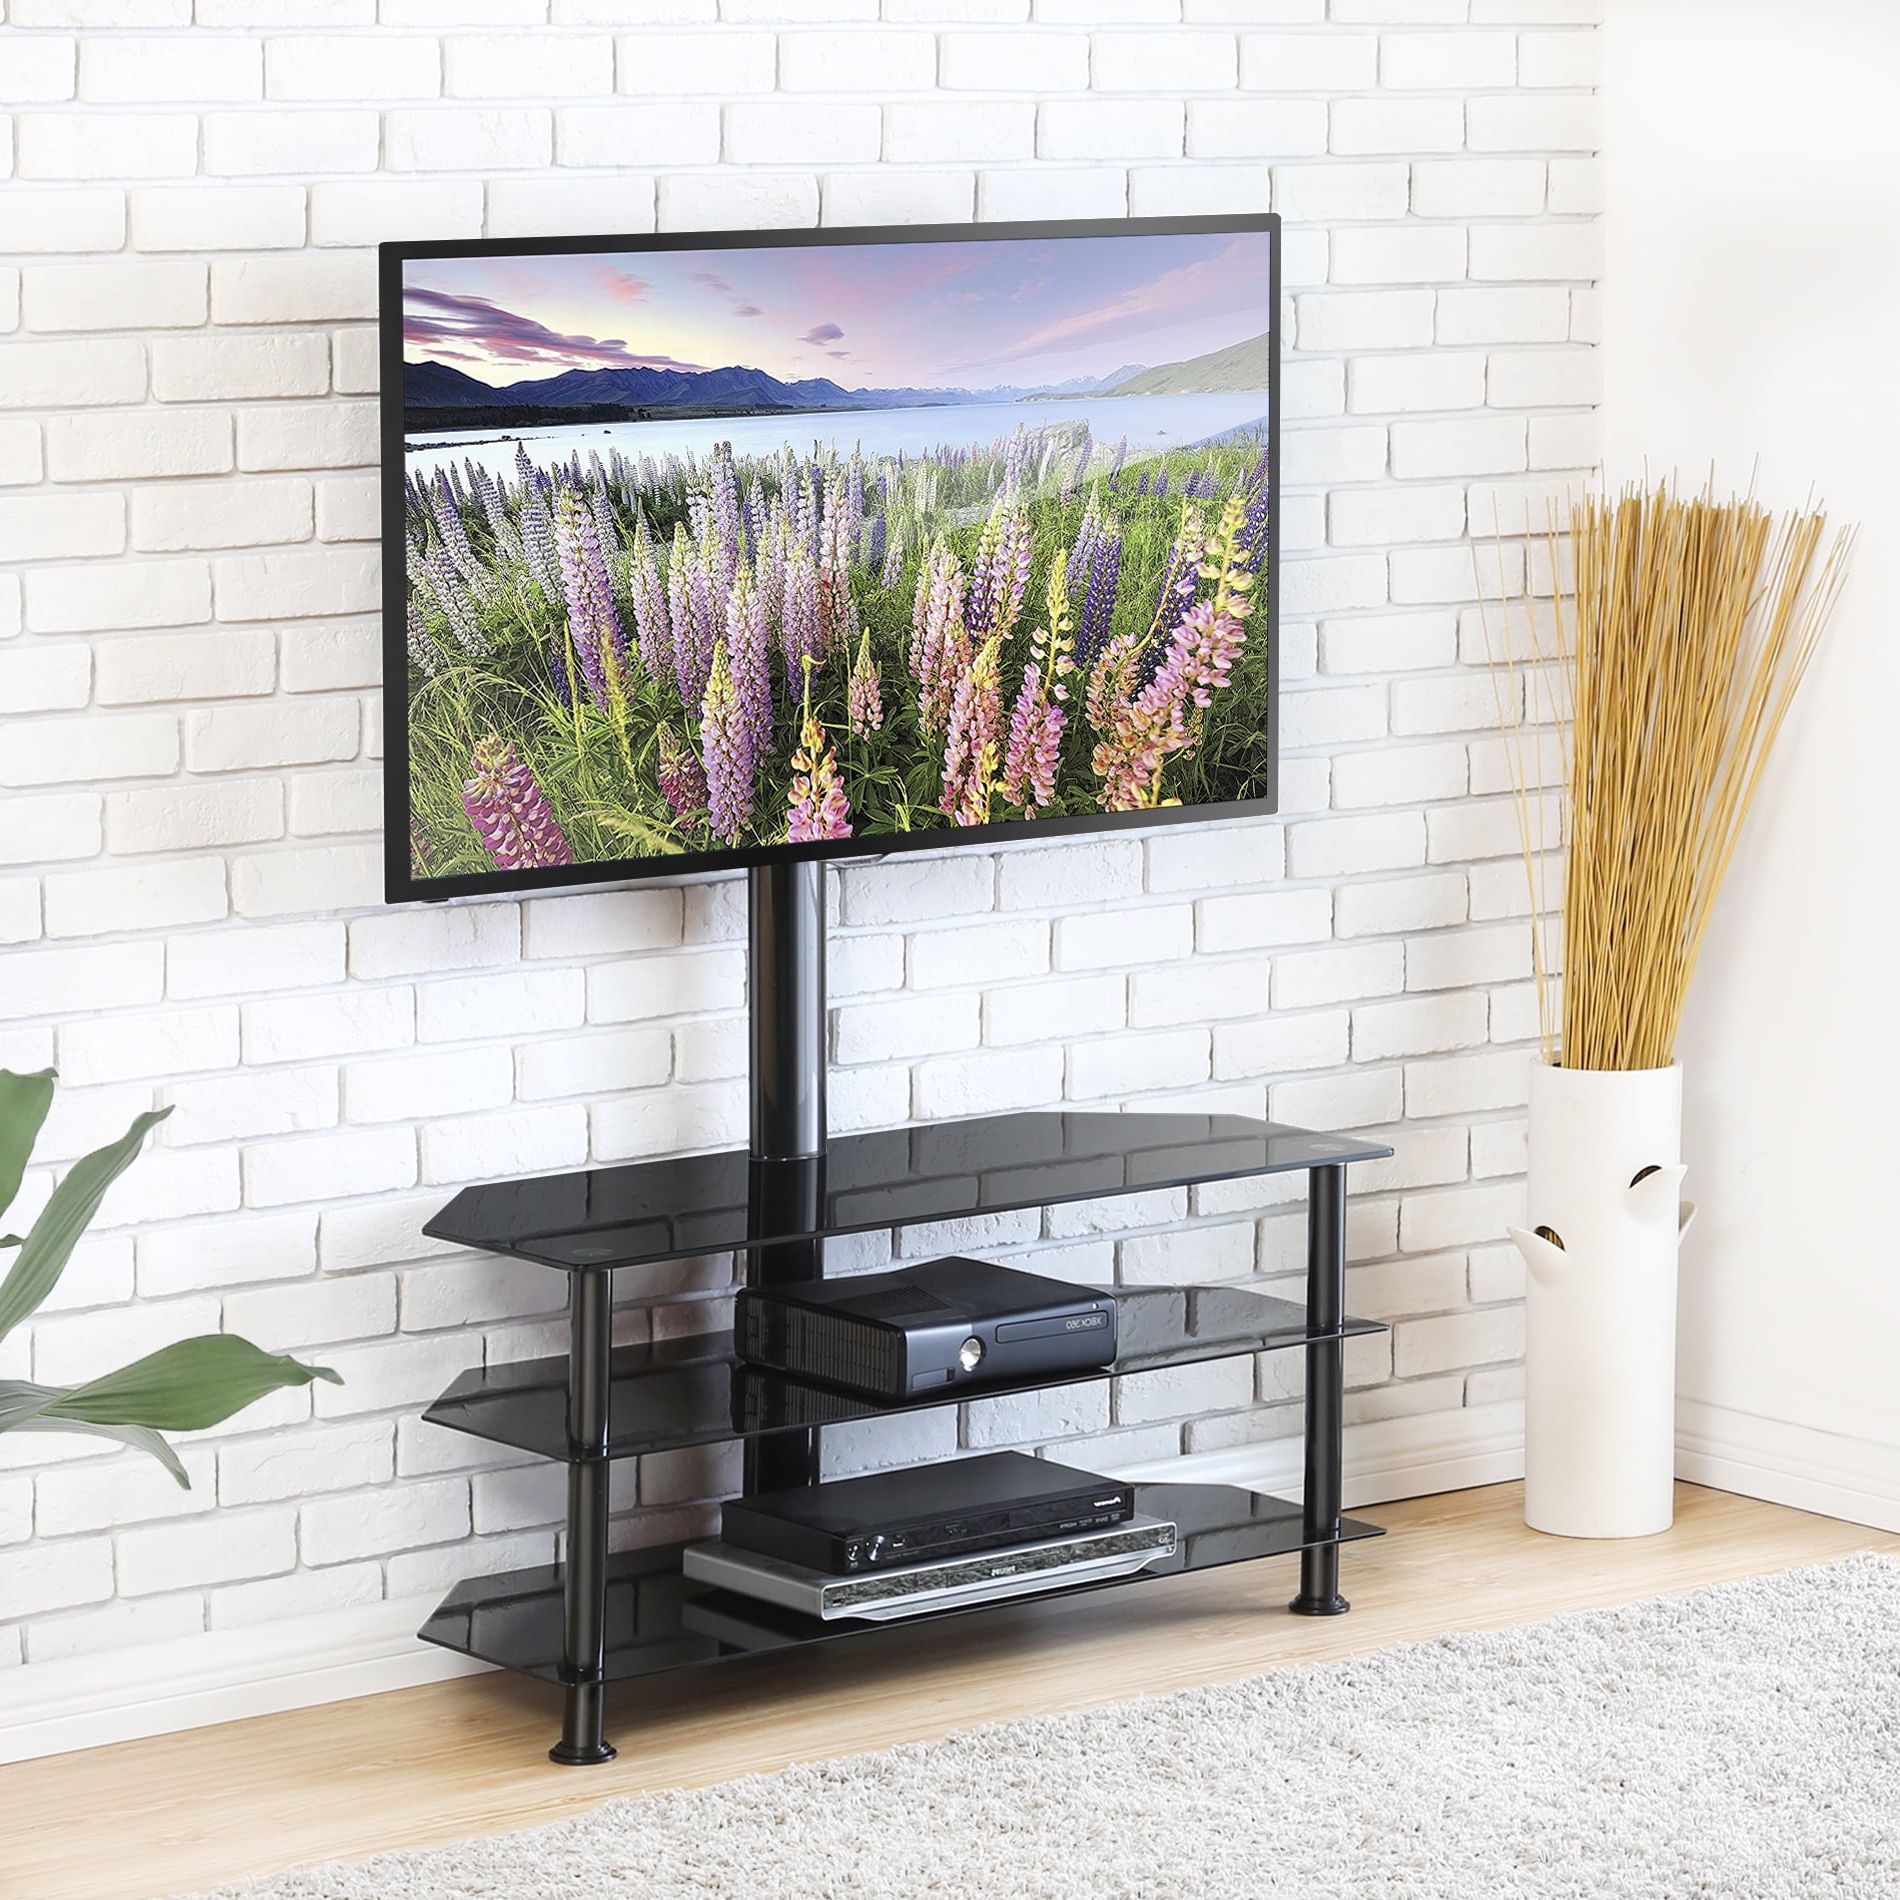 Fitueyes Swivel Tv Stand With Height Adjustable Mount 3 In 1 Flat Panel With Regard To Well Liked Top Shelf Mount Tv Stands (View 15 of 15)